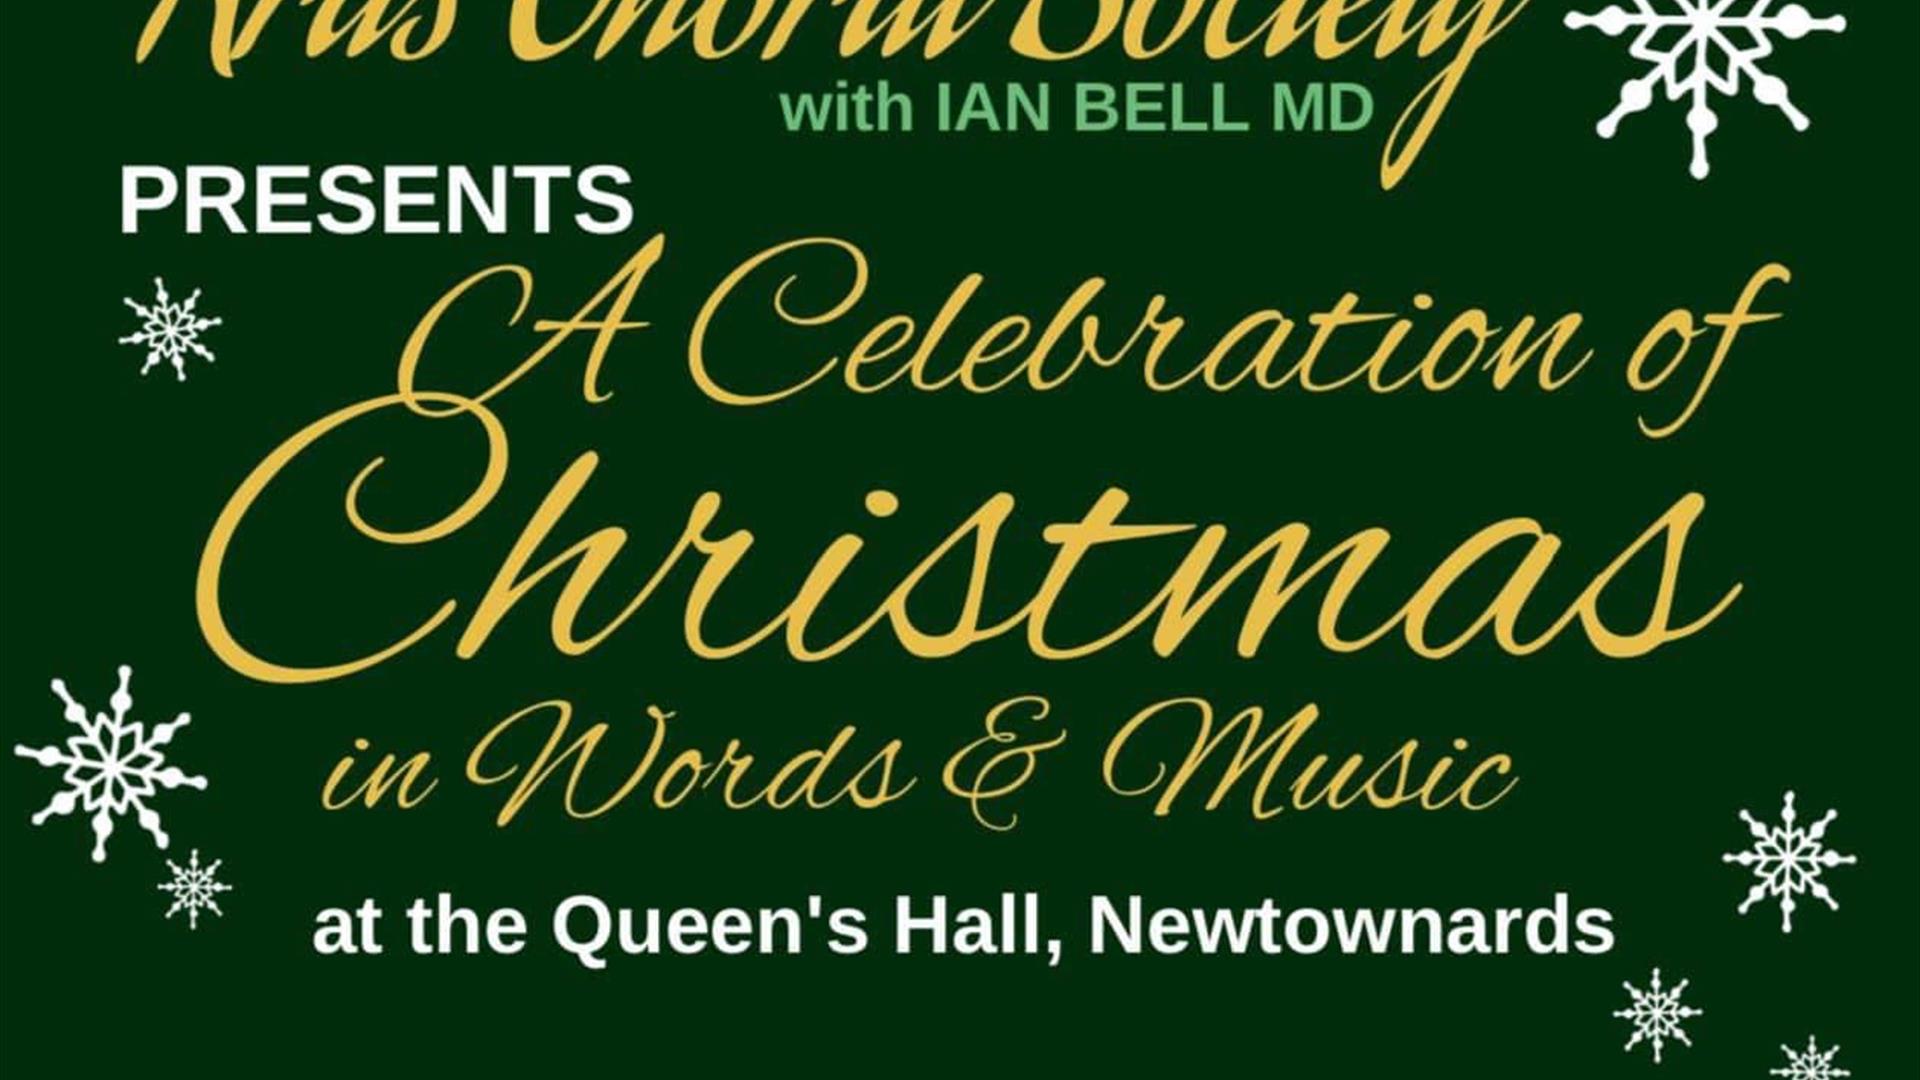 Poster with writing - Ards Choral Society presents A Celebration of Christmas in Words and Music